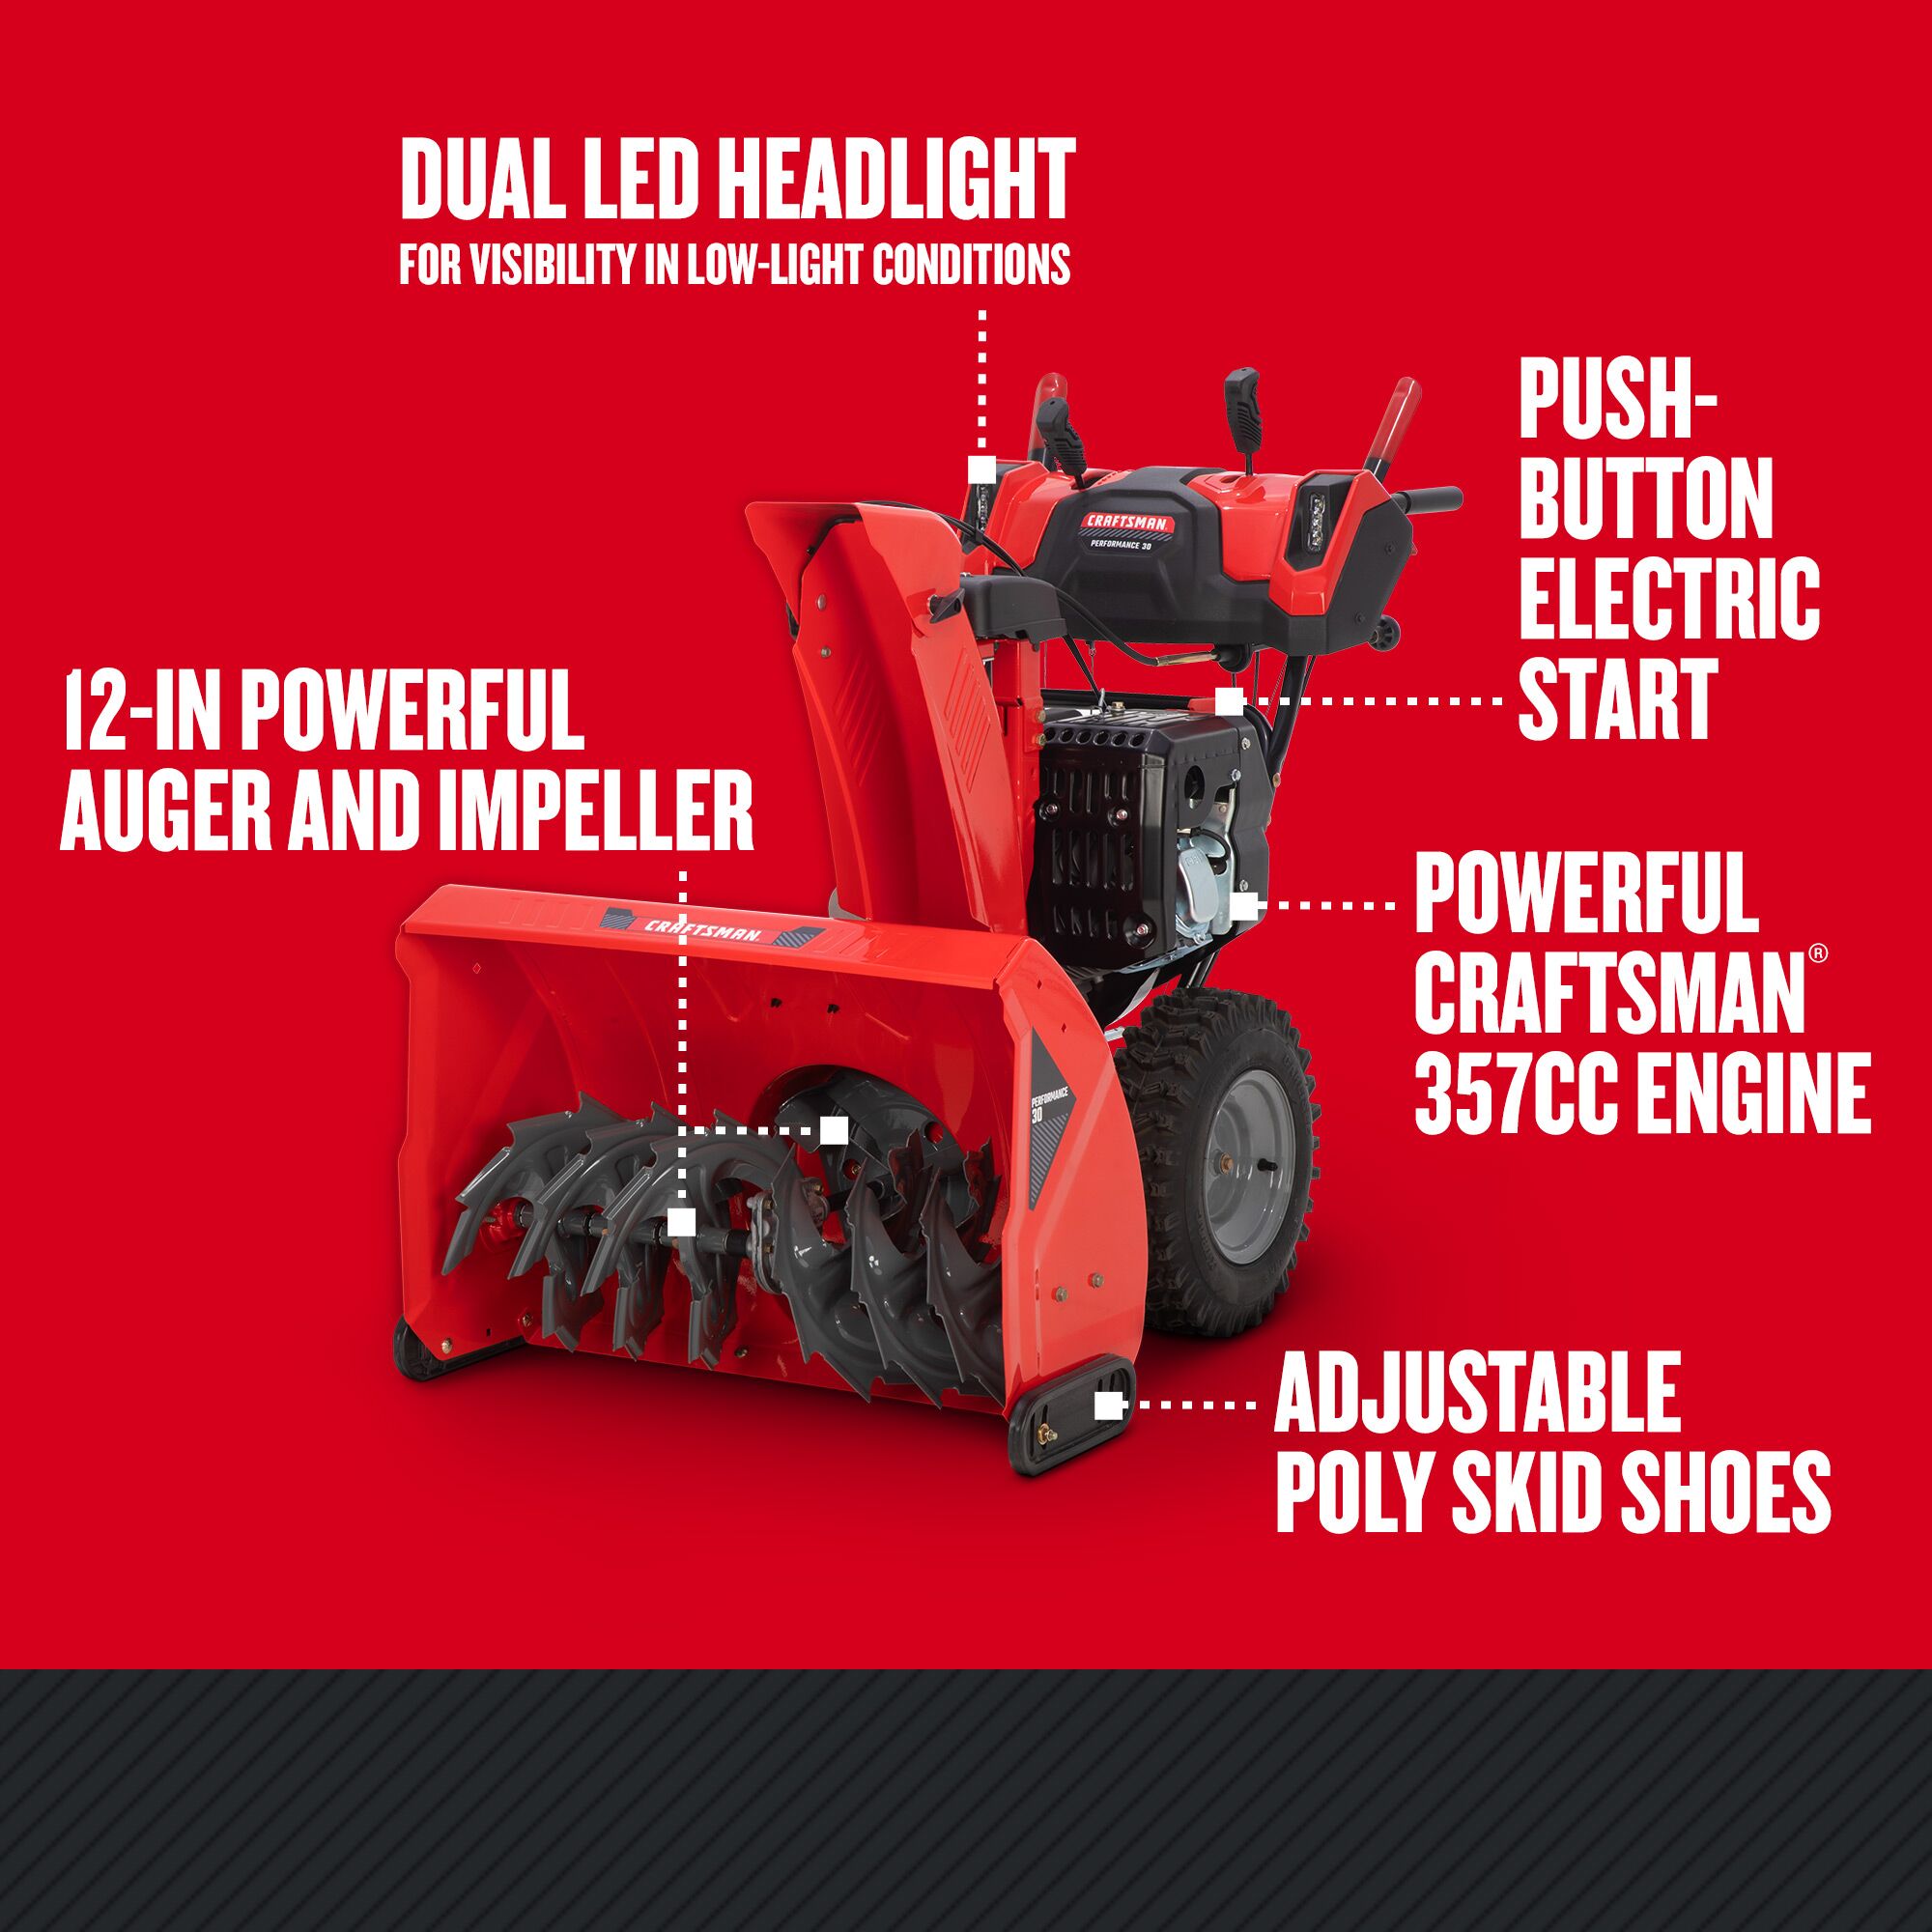 CRAFTSMAN 30-in. 357-cc Two-Stage Gas Snow Blower graphic highlighting key features